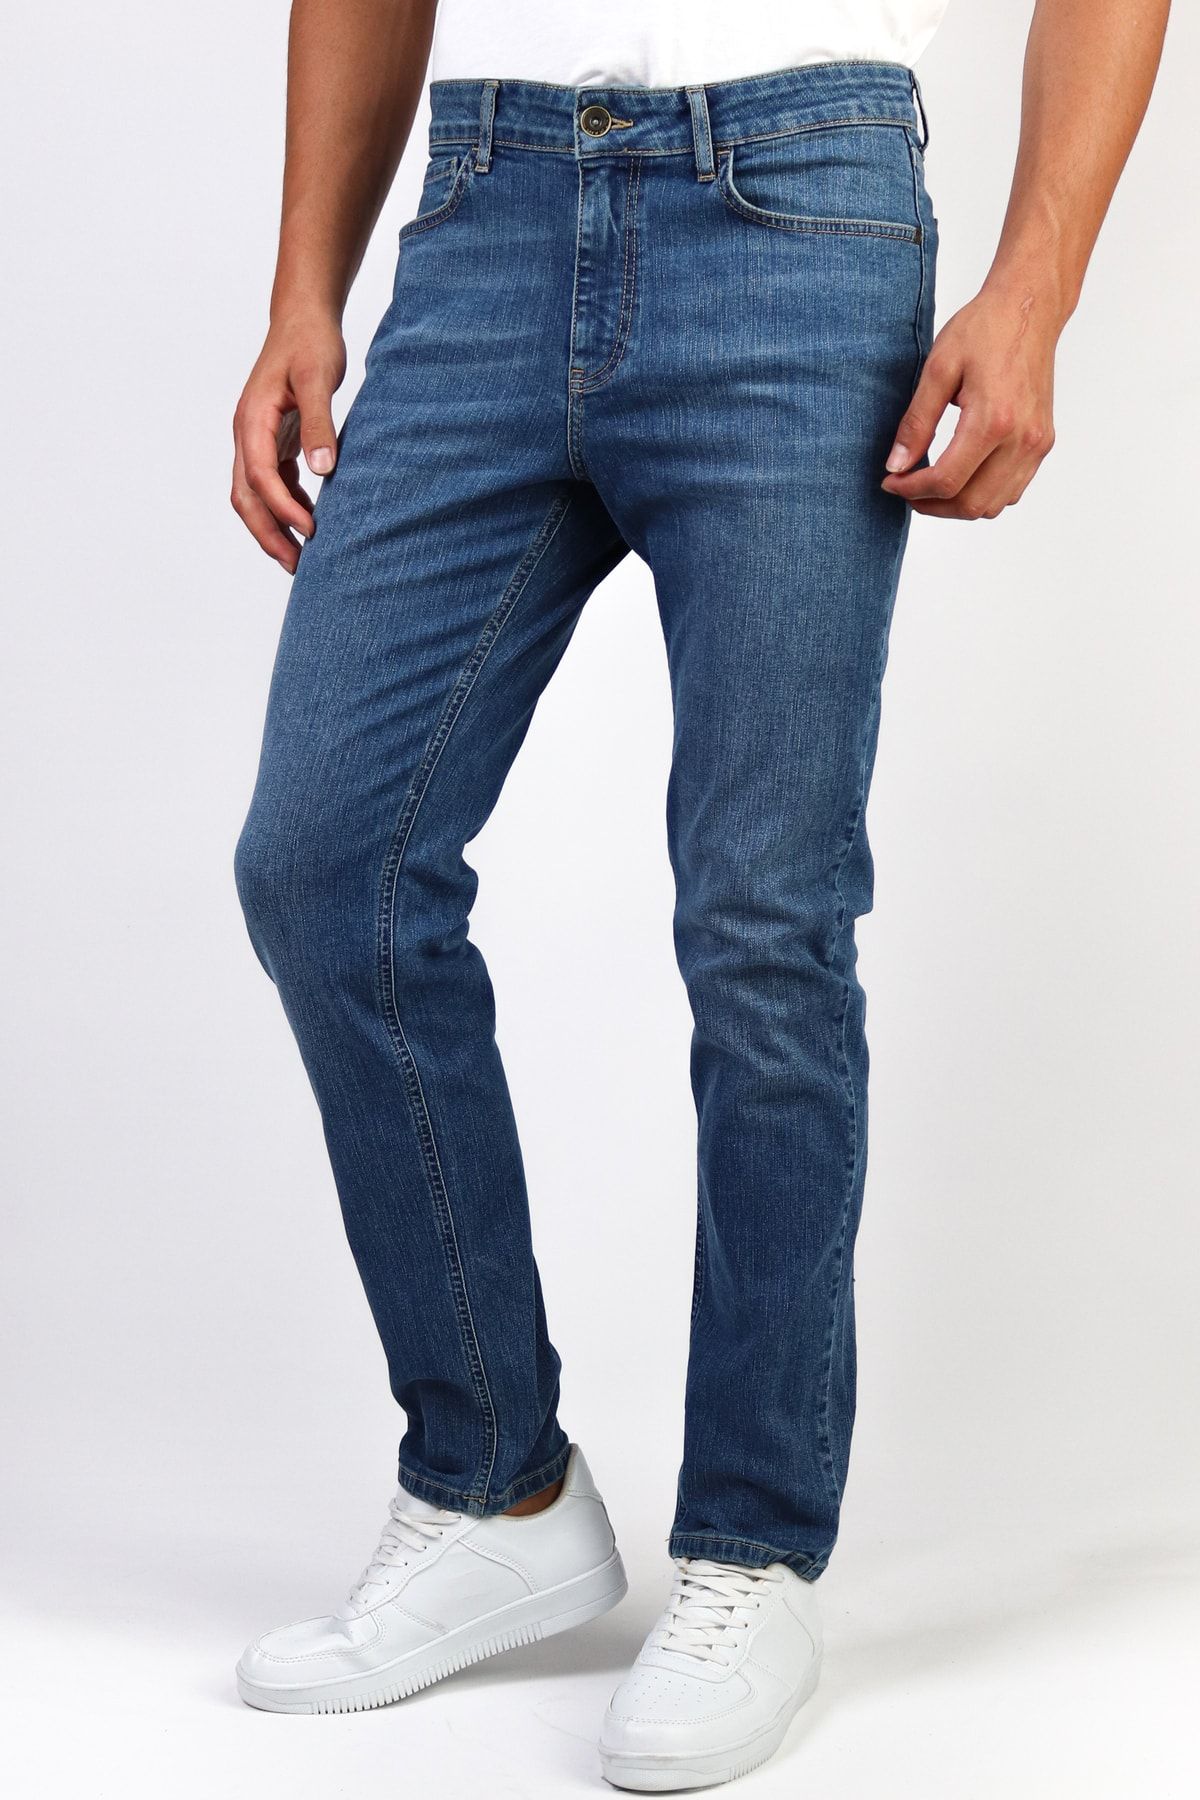 Amazon.com: Denim Material Blue high Stretch Denim Fabric Clothing Pants  high-Grade Washed Denim 135 cm Wide Sold by The Meter